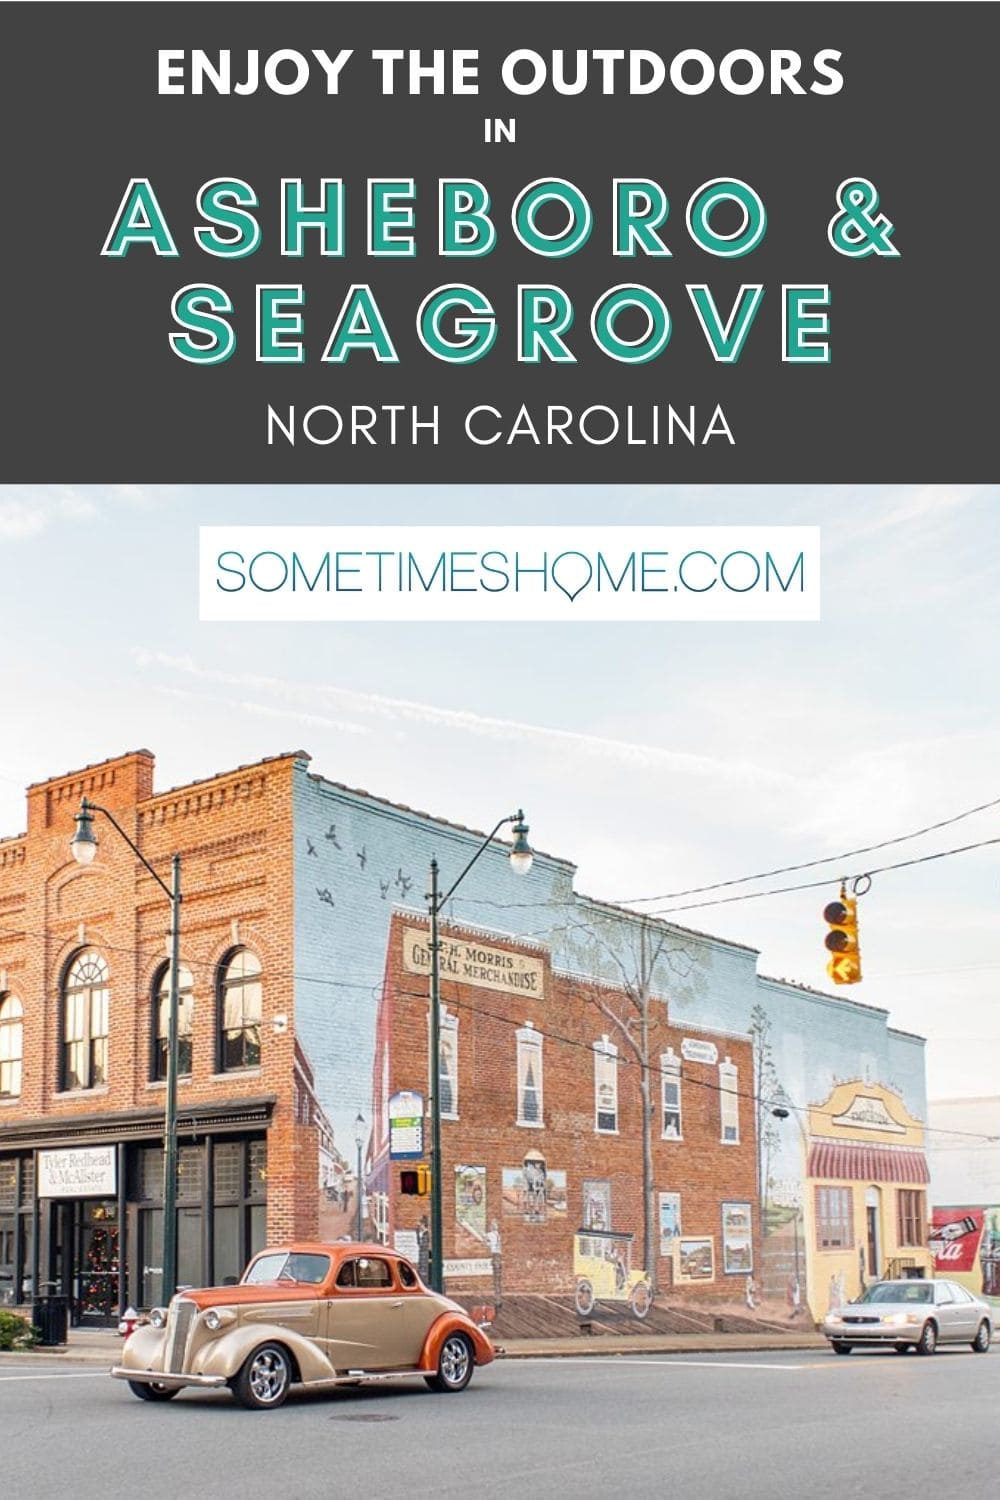 Enjoy the Outdoors in Asheboro and Seagrove North Carolina with a photo of a street mural and vintage car.